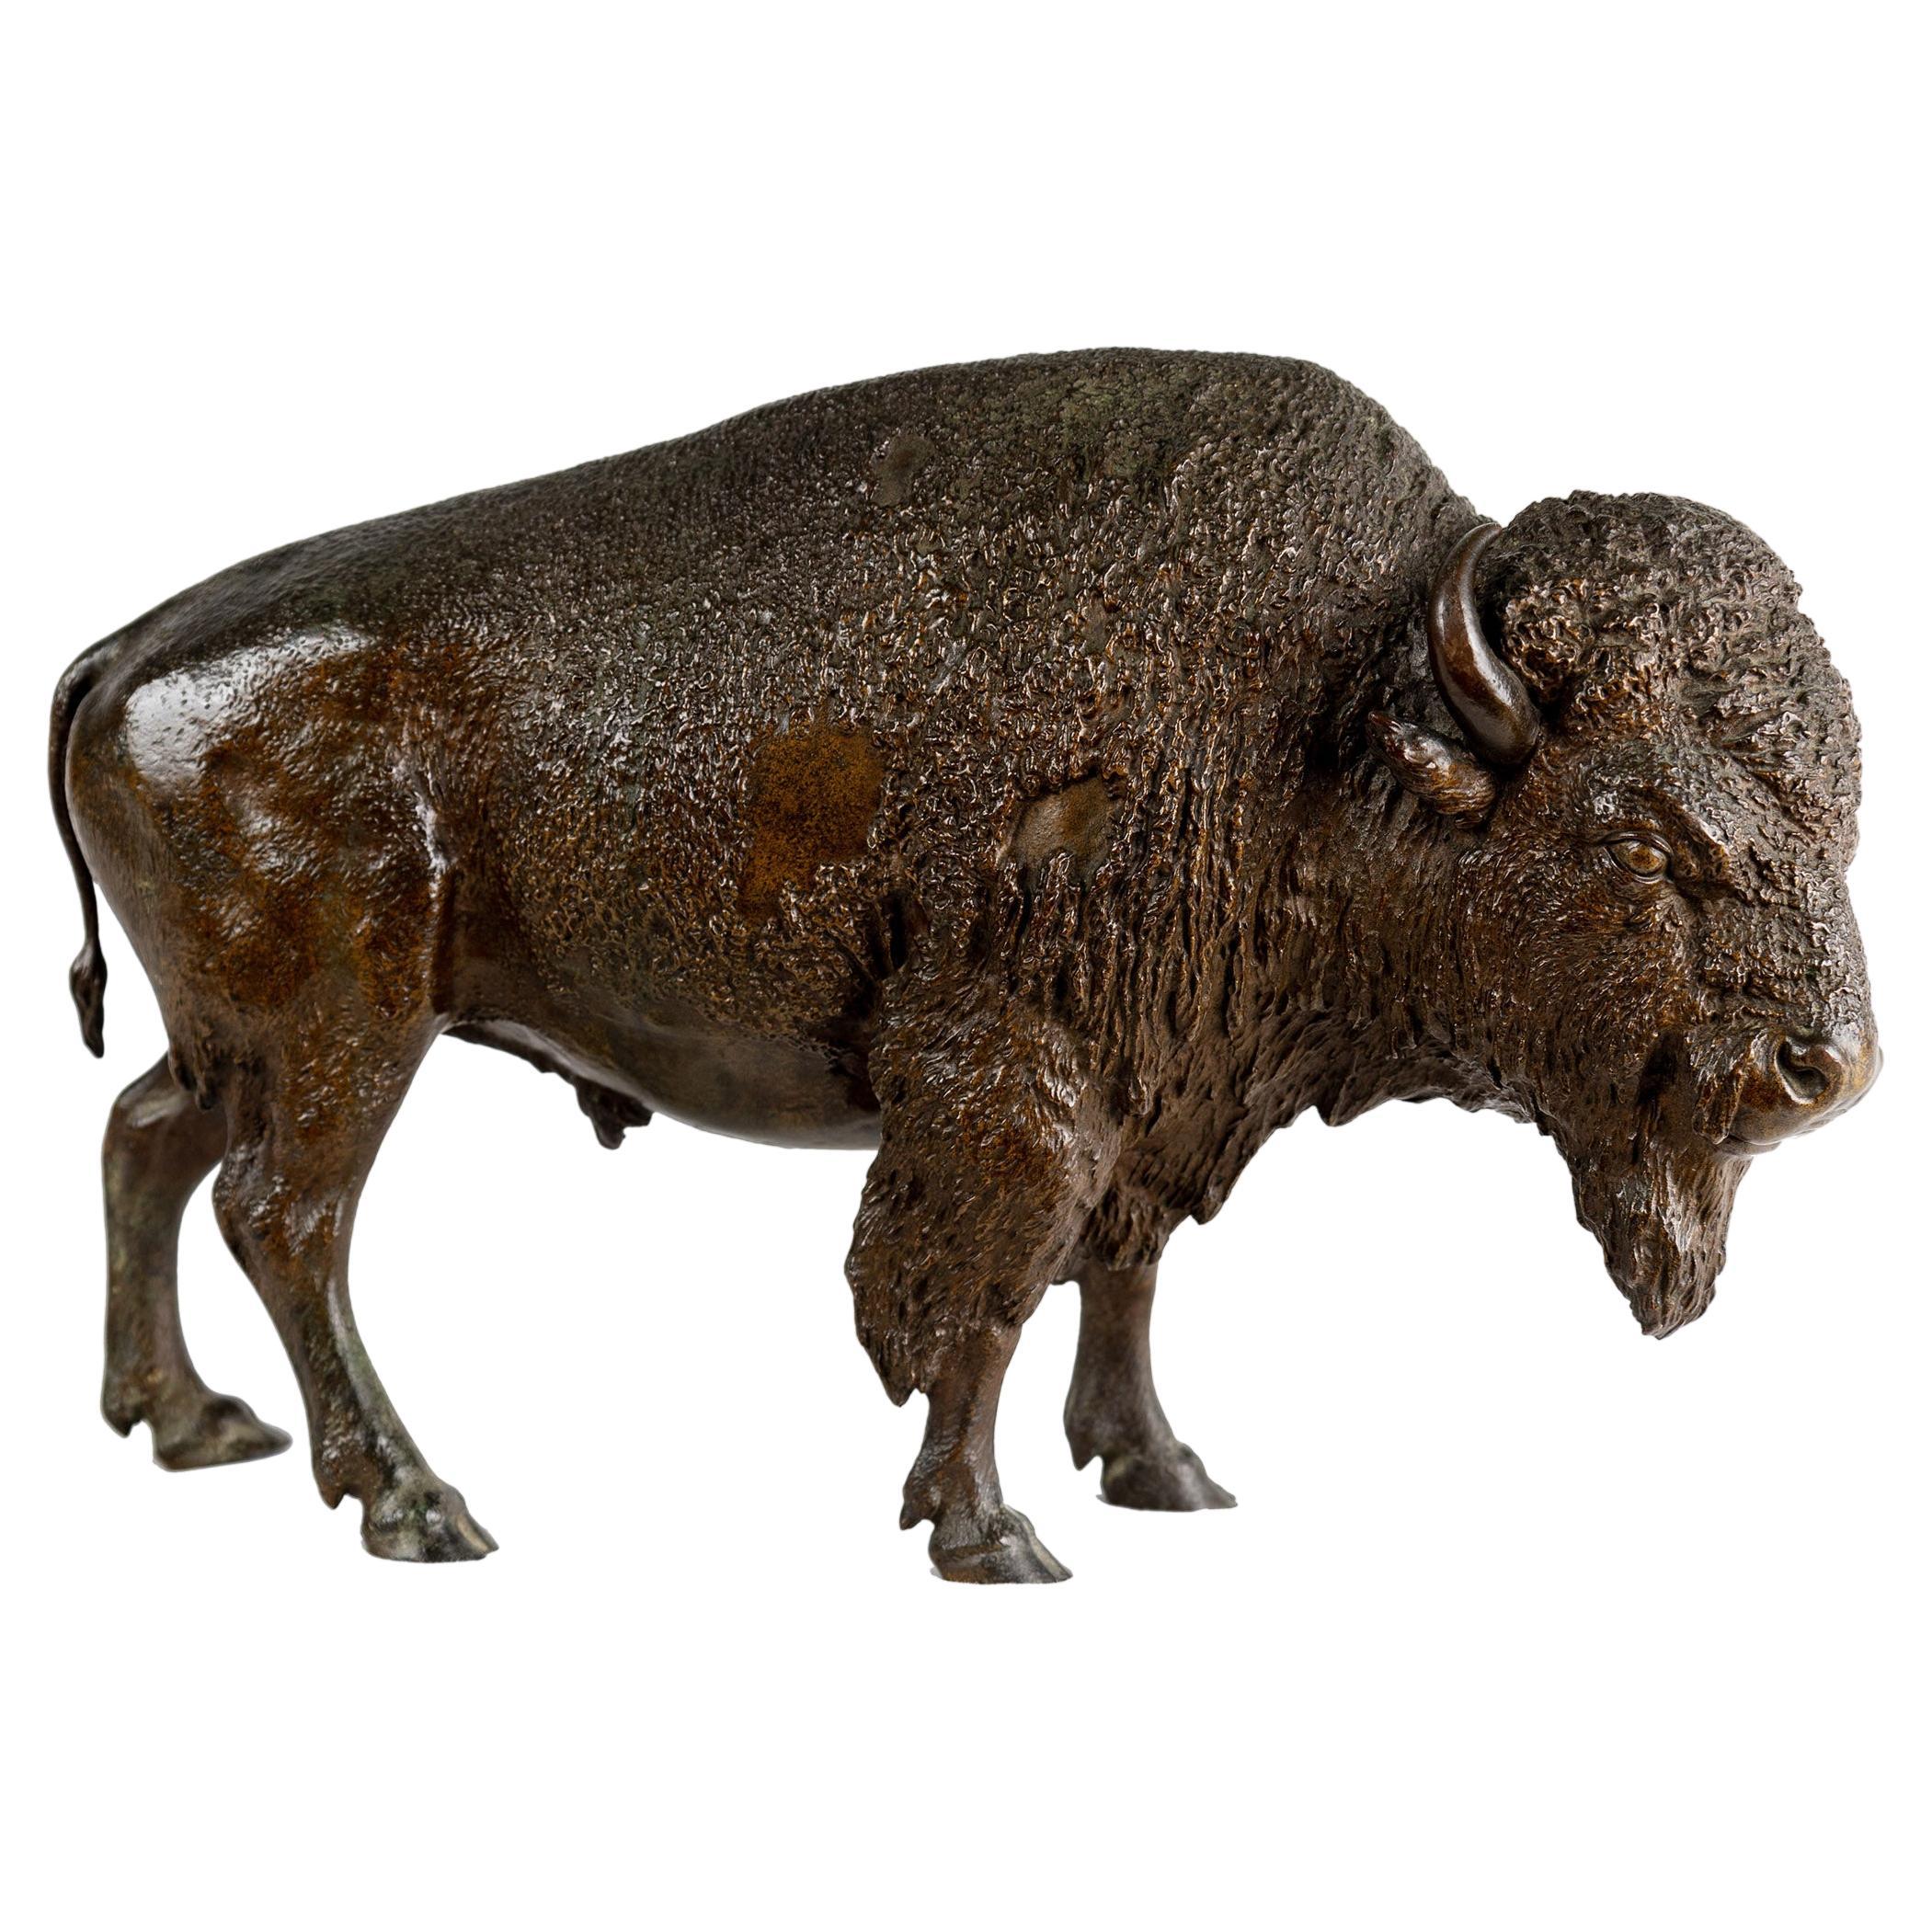 A Rare And Remarkable Bronze American Bison, Circa 1885 By Franz Bergmann For Sale